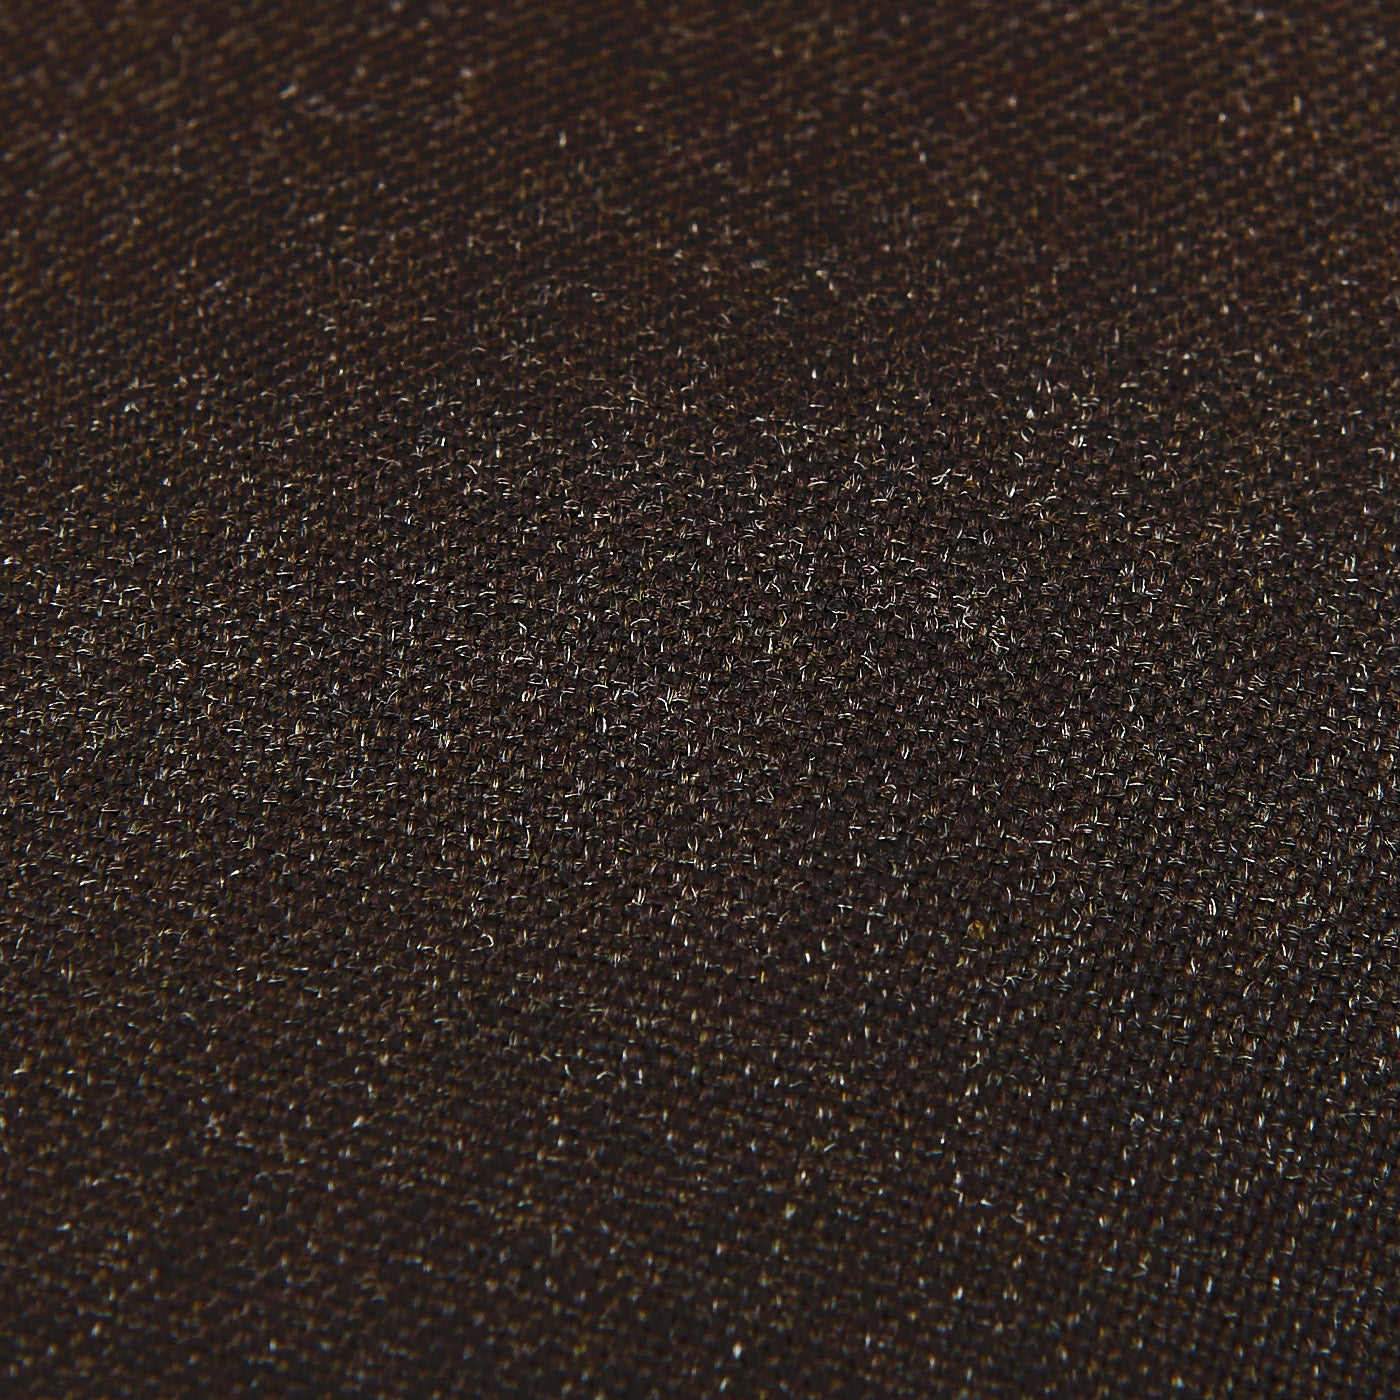 Dreaming of Monday Brown 7-Fold High Twist Wool Tie Fabric